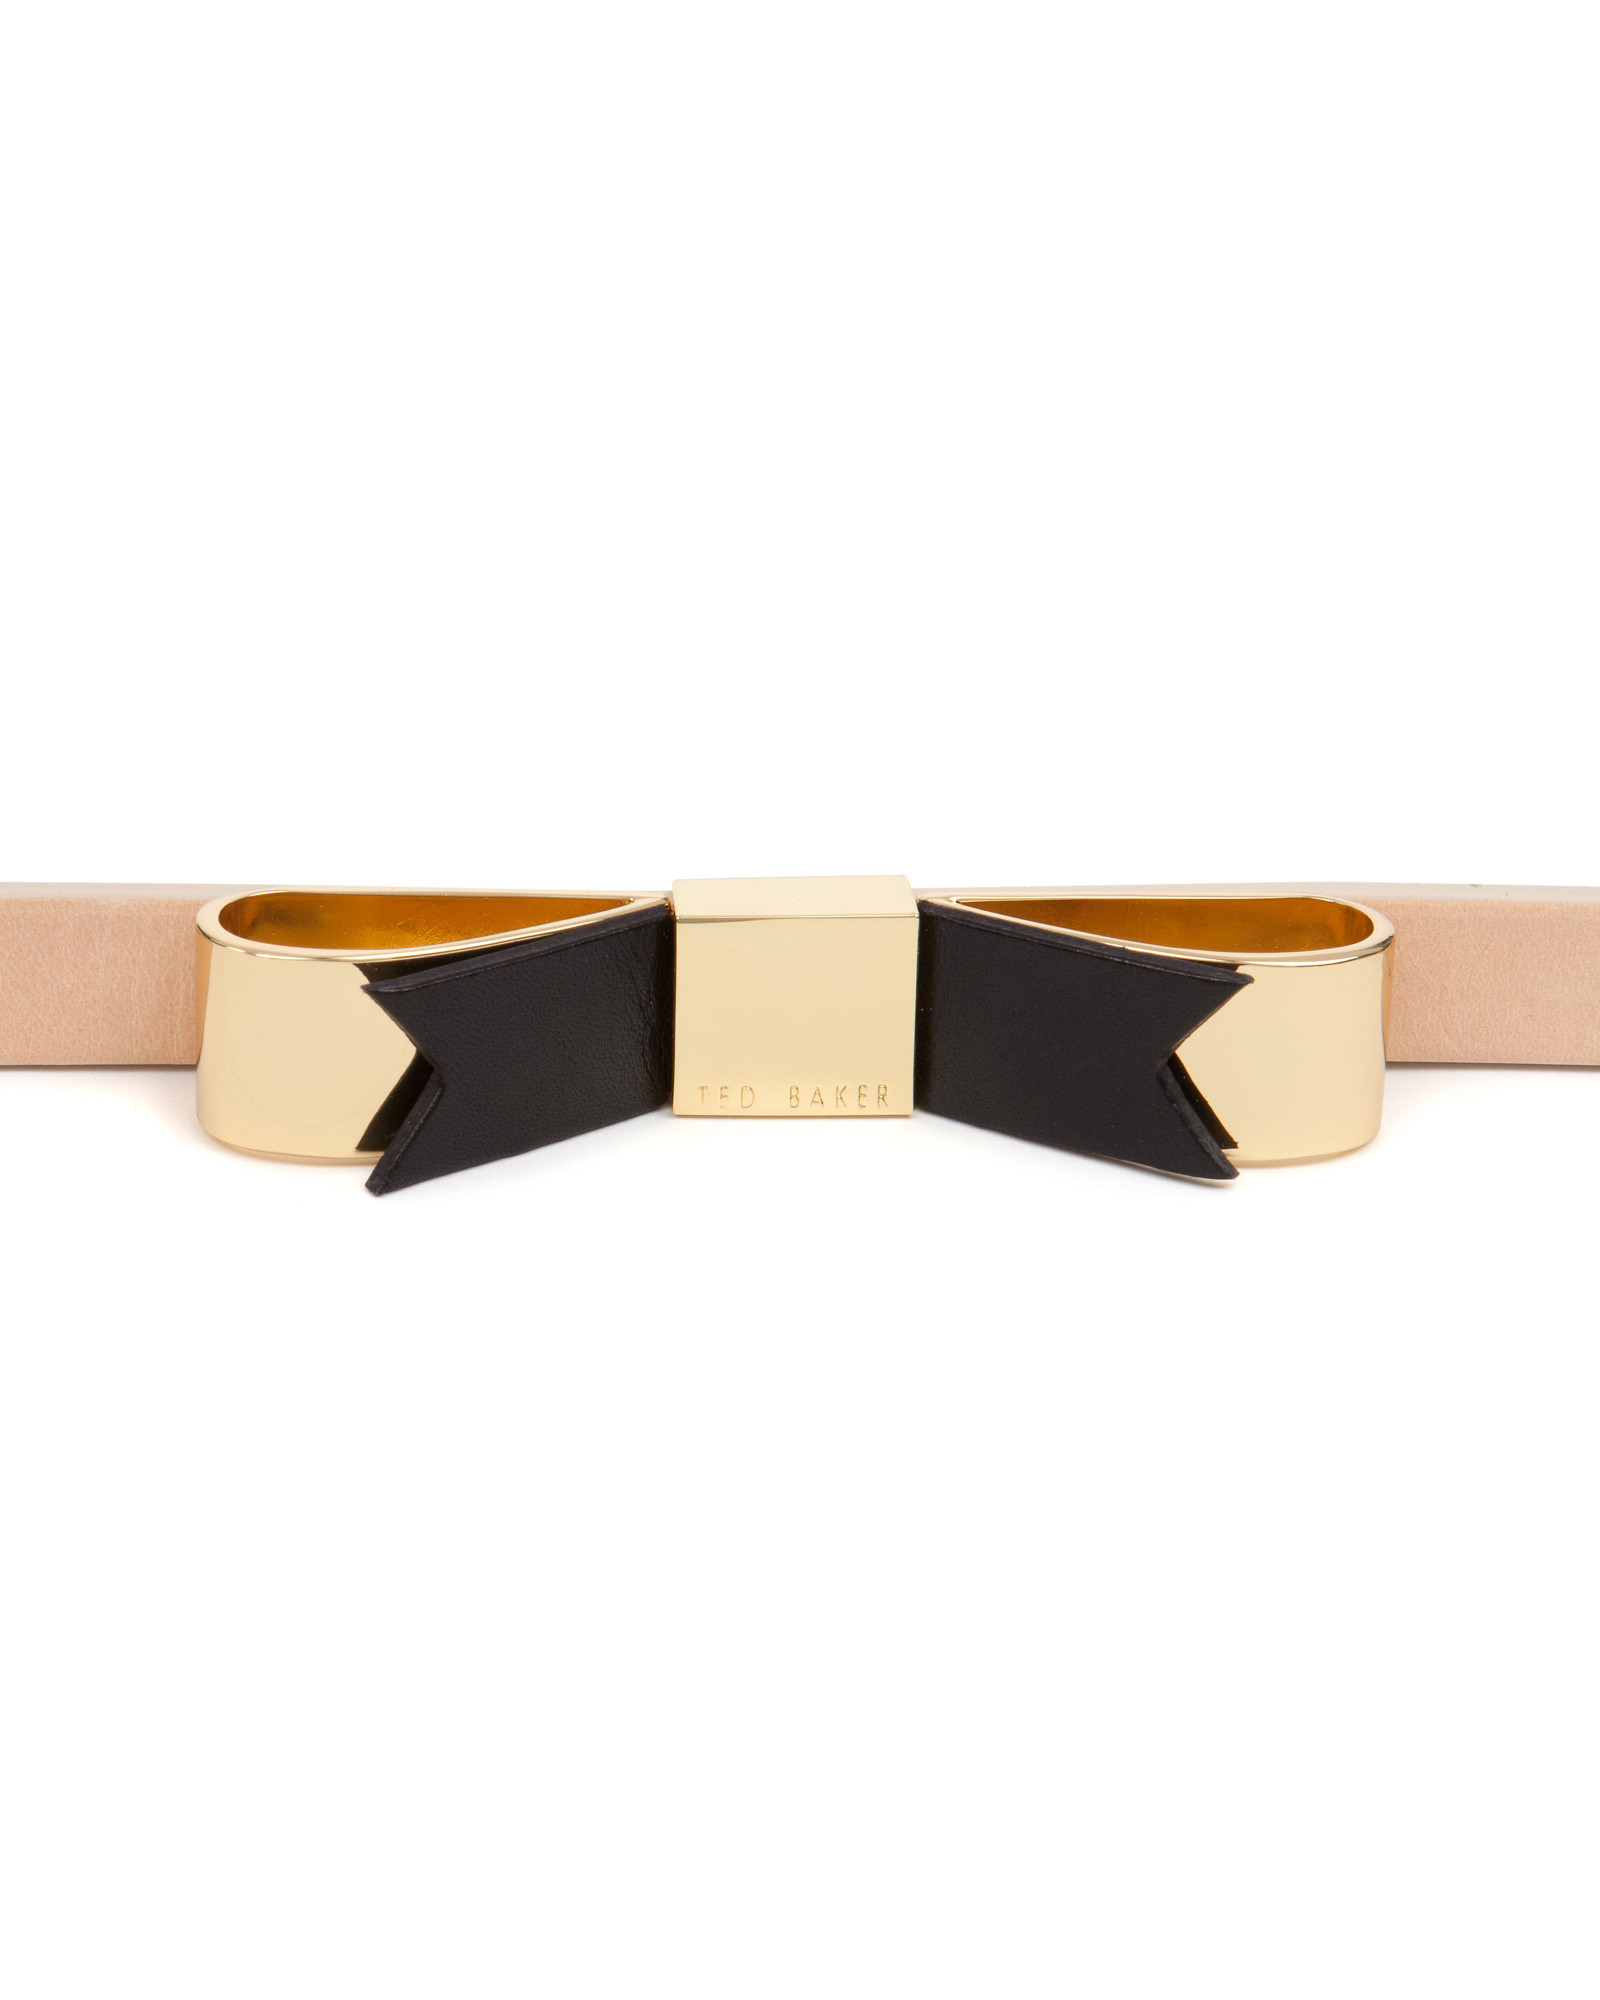 Ted Baker Ladies Belt Outlet Sale, UP TO 50% OFF | www.ingeniovirtual.com